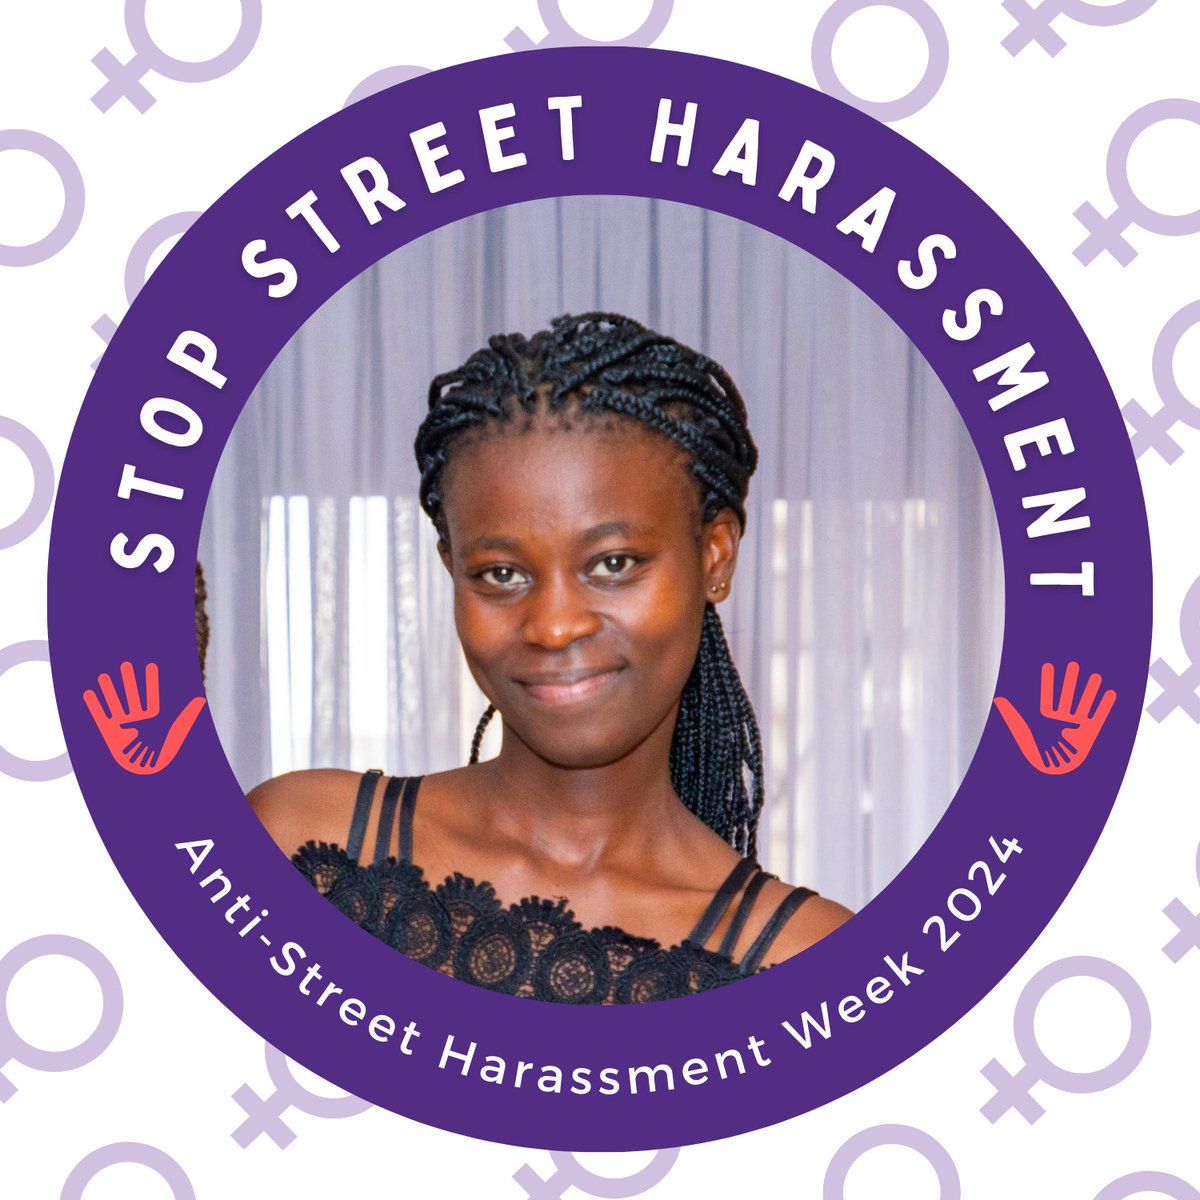 Respect yourself by respecting others 
Let's work together and stop street harassment 
#StopStreetHarassement
#Safecity
#AntiSHweek2024
#Polycomspeaks
@polycomdev
@thesafecityapp
@urbancampaign
@SDGsKenyaForum